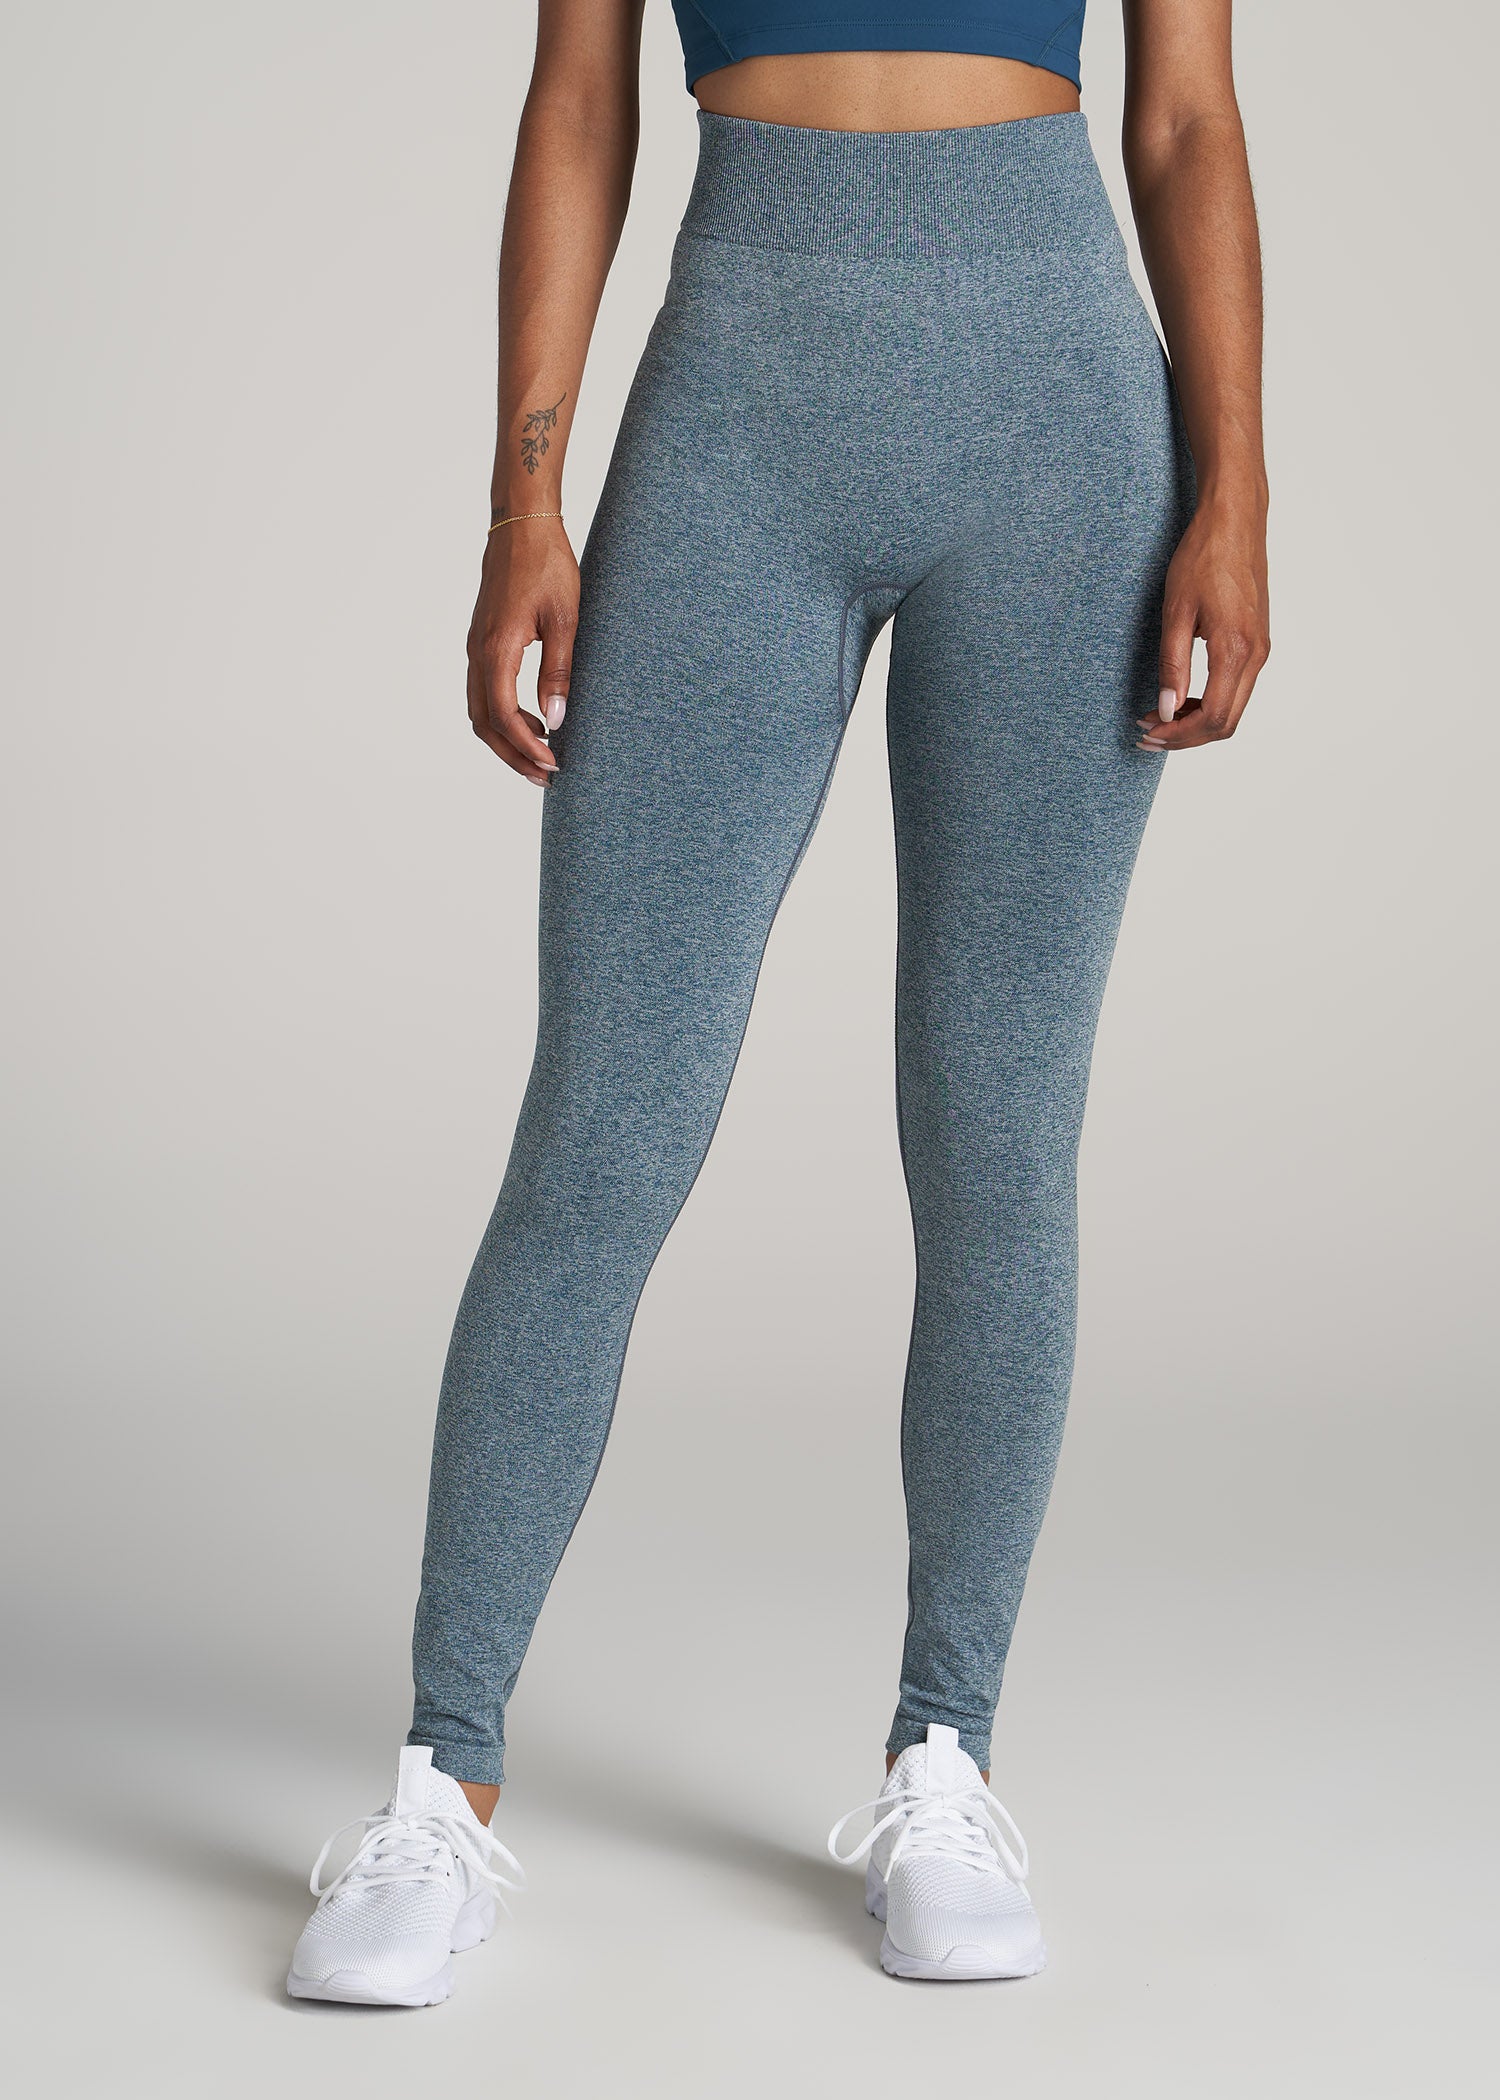 Seamless Leggings for Tall Women in Bright Navy Heather